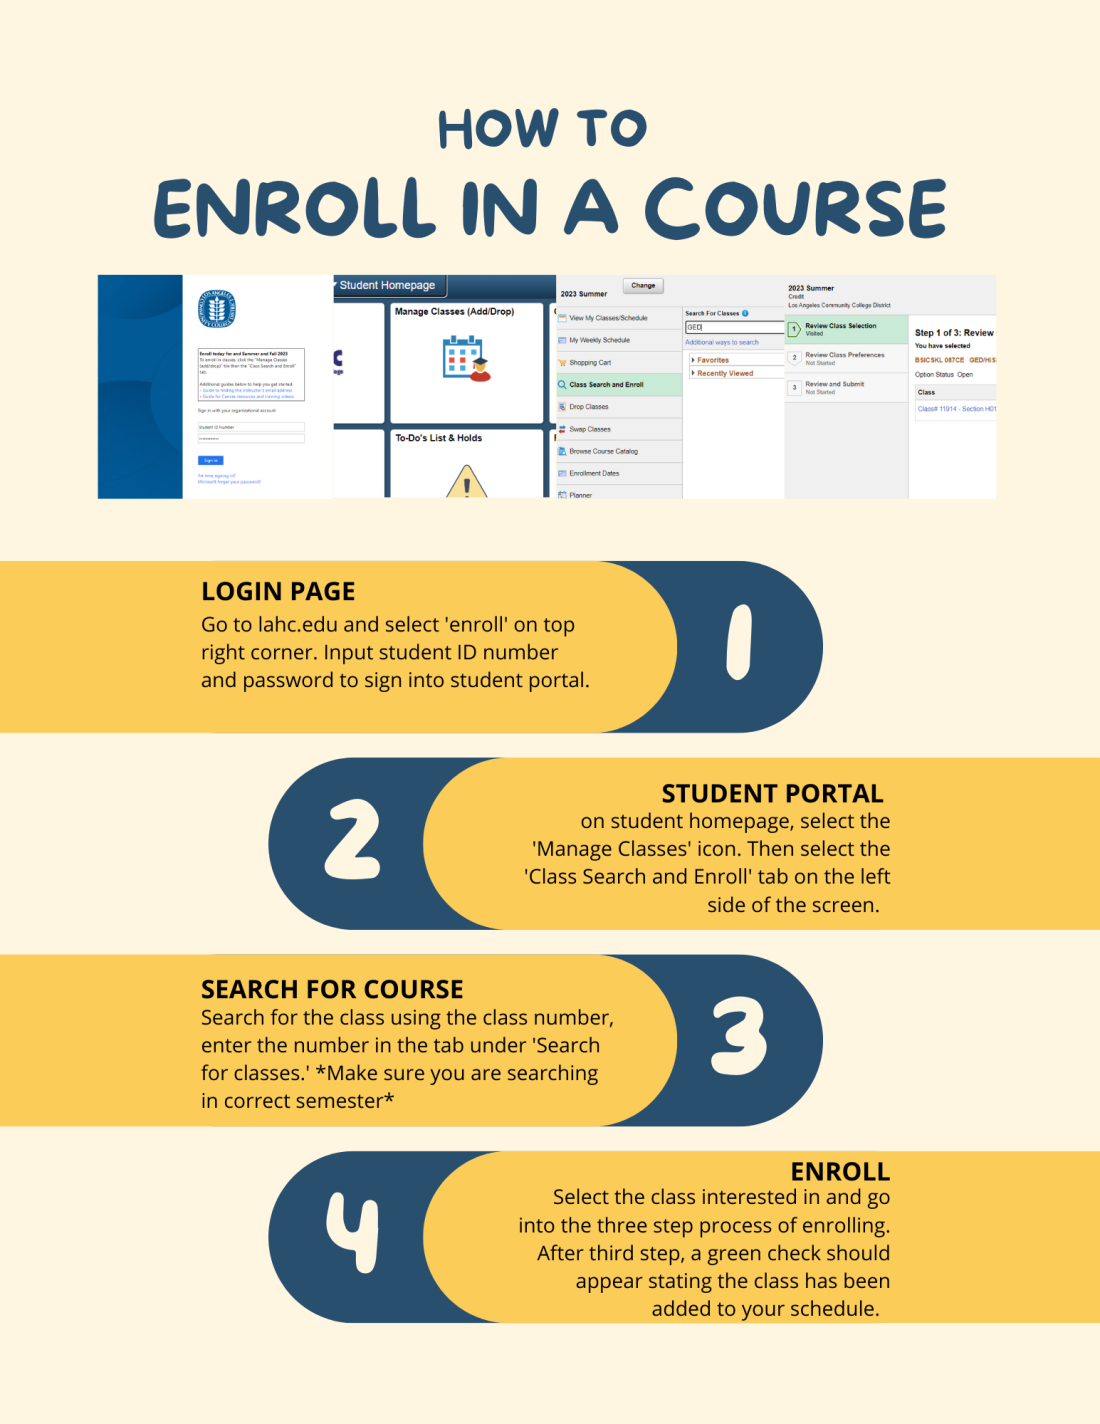 How to Enroll in a Course? 